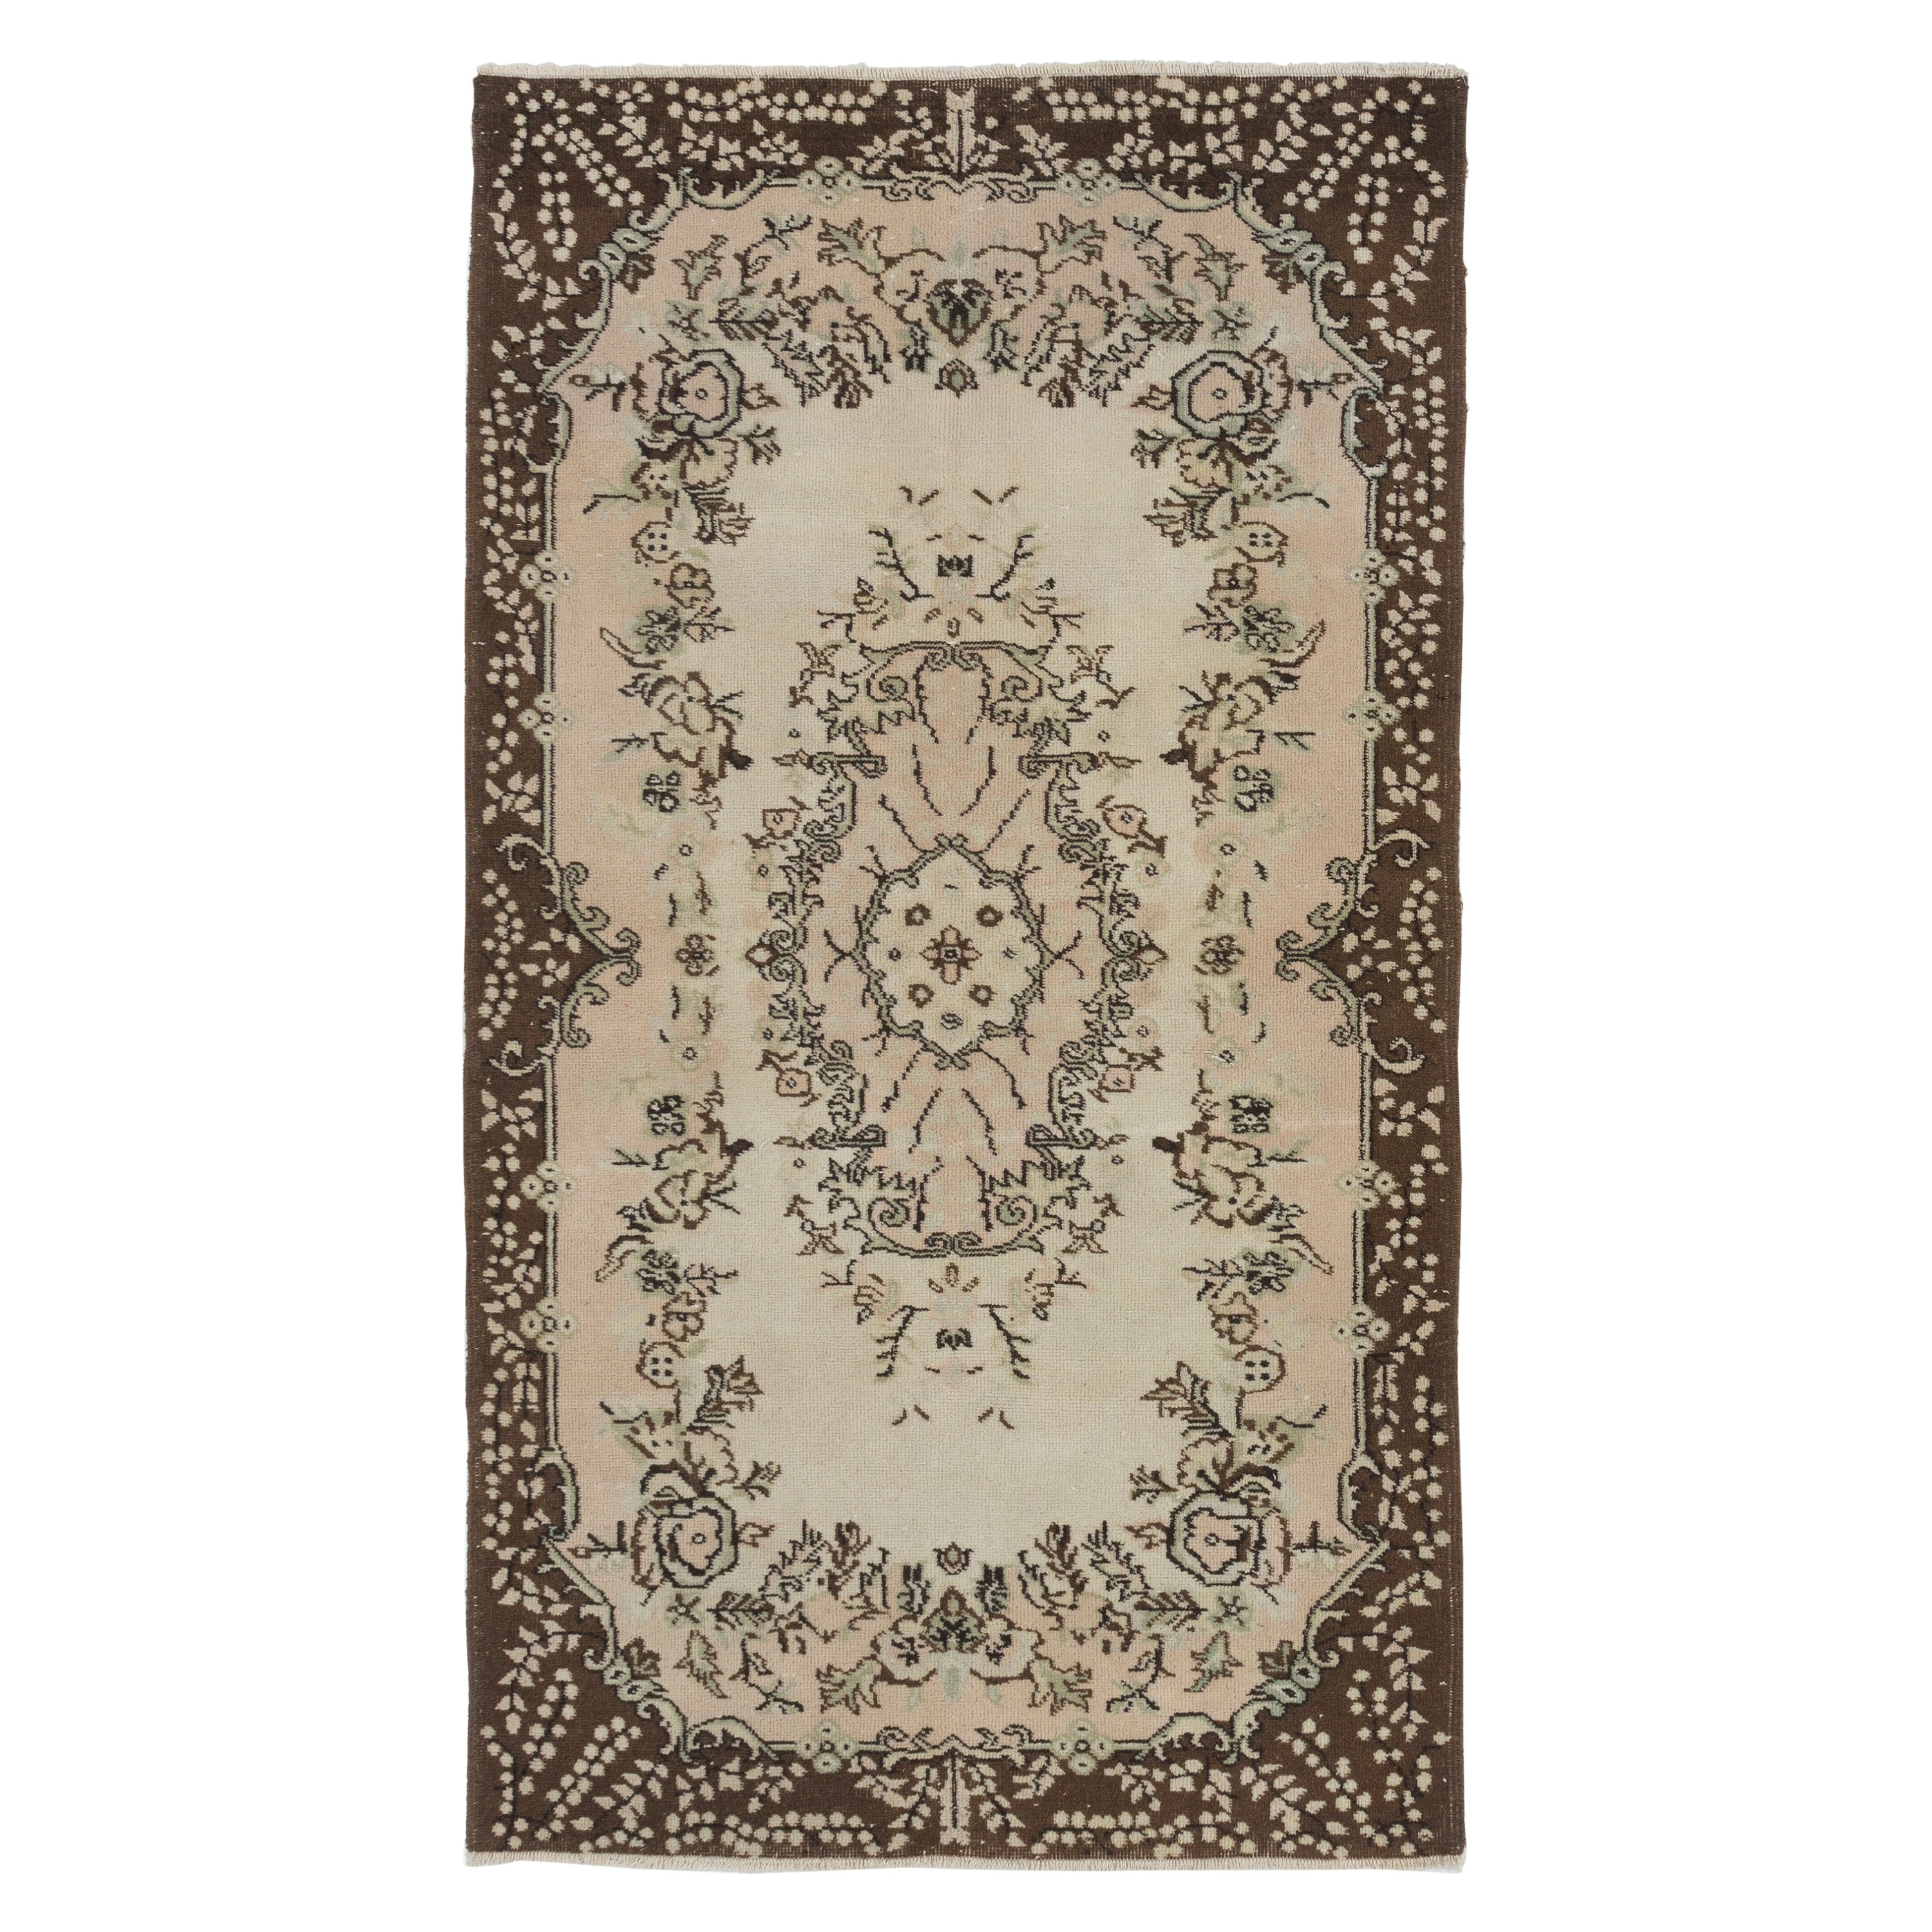 4x7 Ft Hand-Knotted Vintage Floral Garden Design Anatolian Accent Rug. ca 1960 For Sale